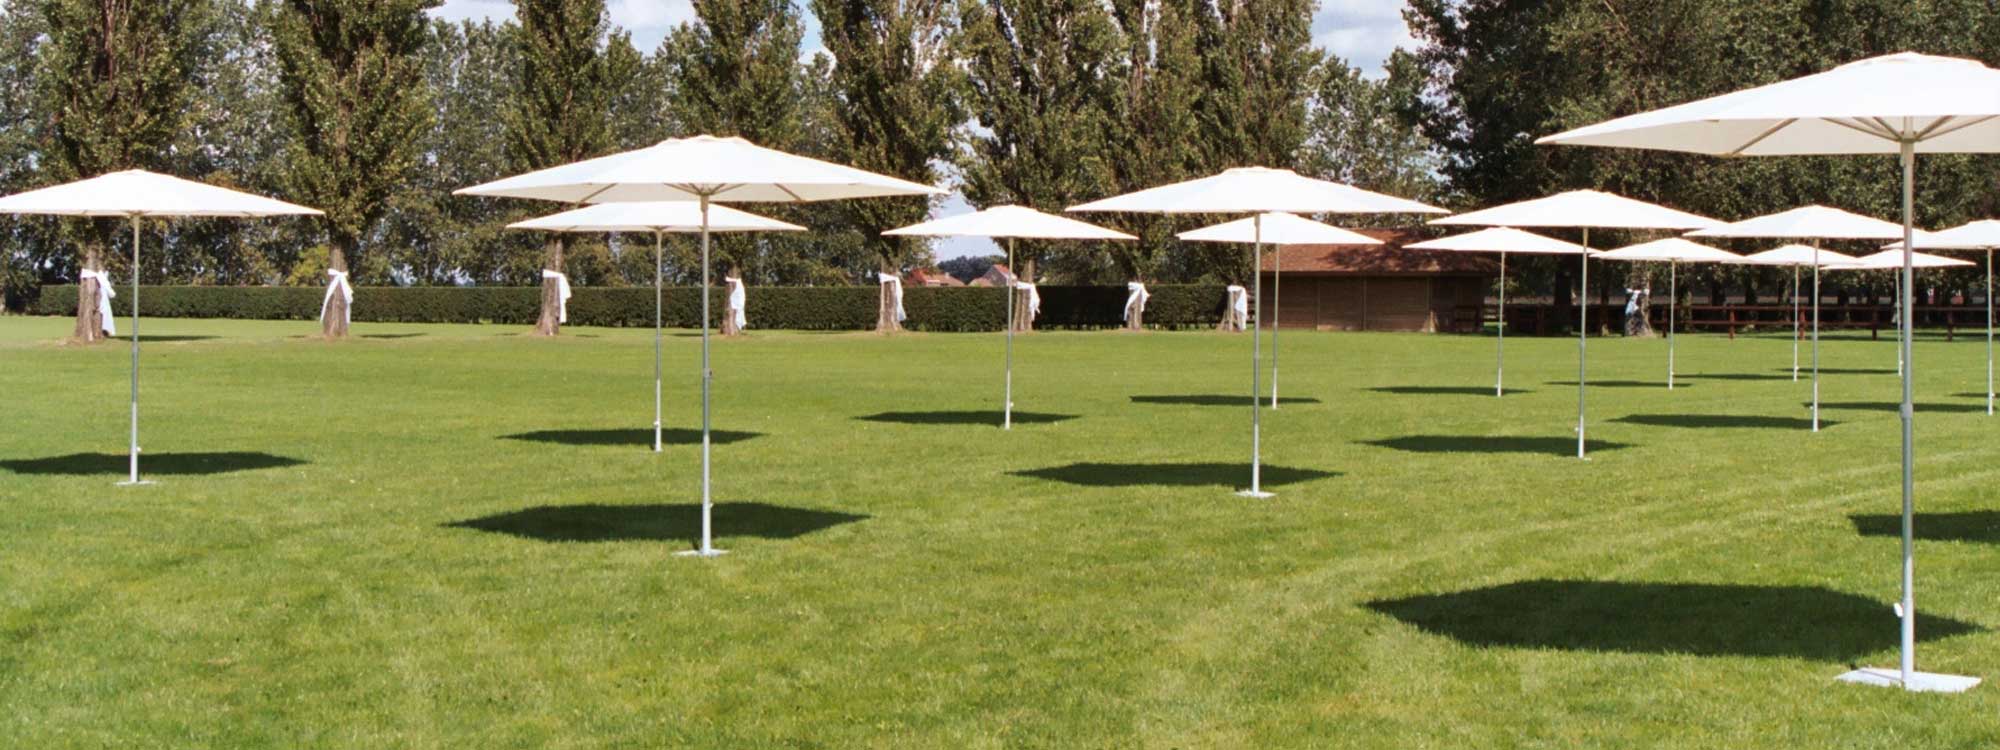 Image of multiple Prostor P50 white mast parasols on a grass lawn, with trees and sky in the background